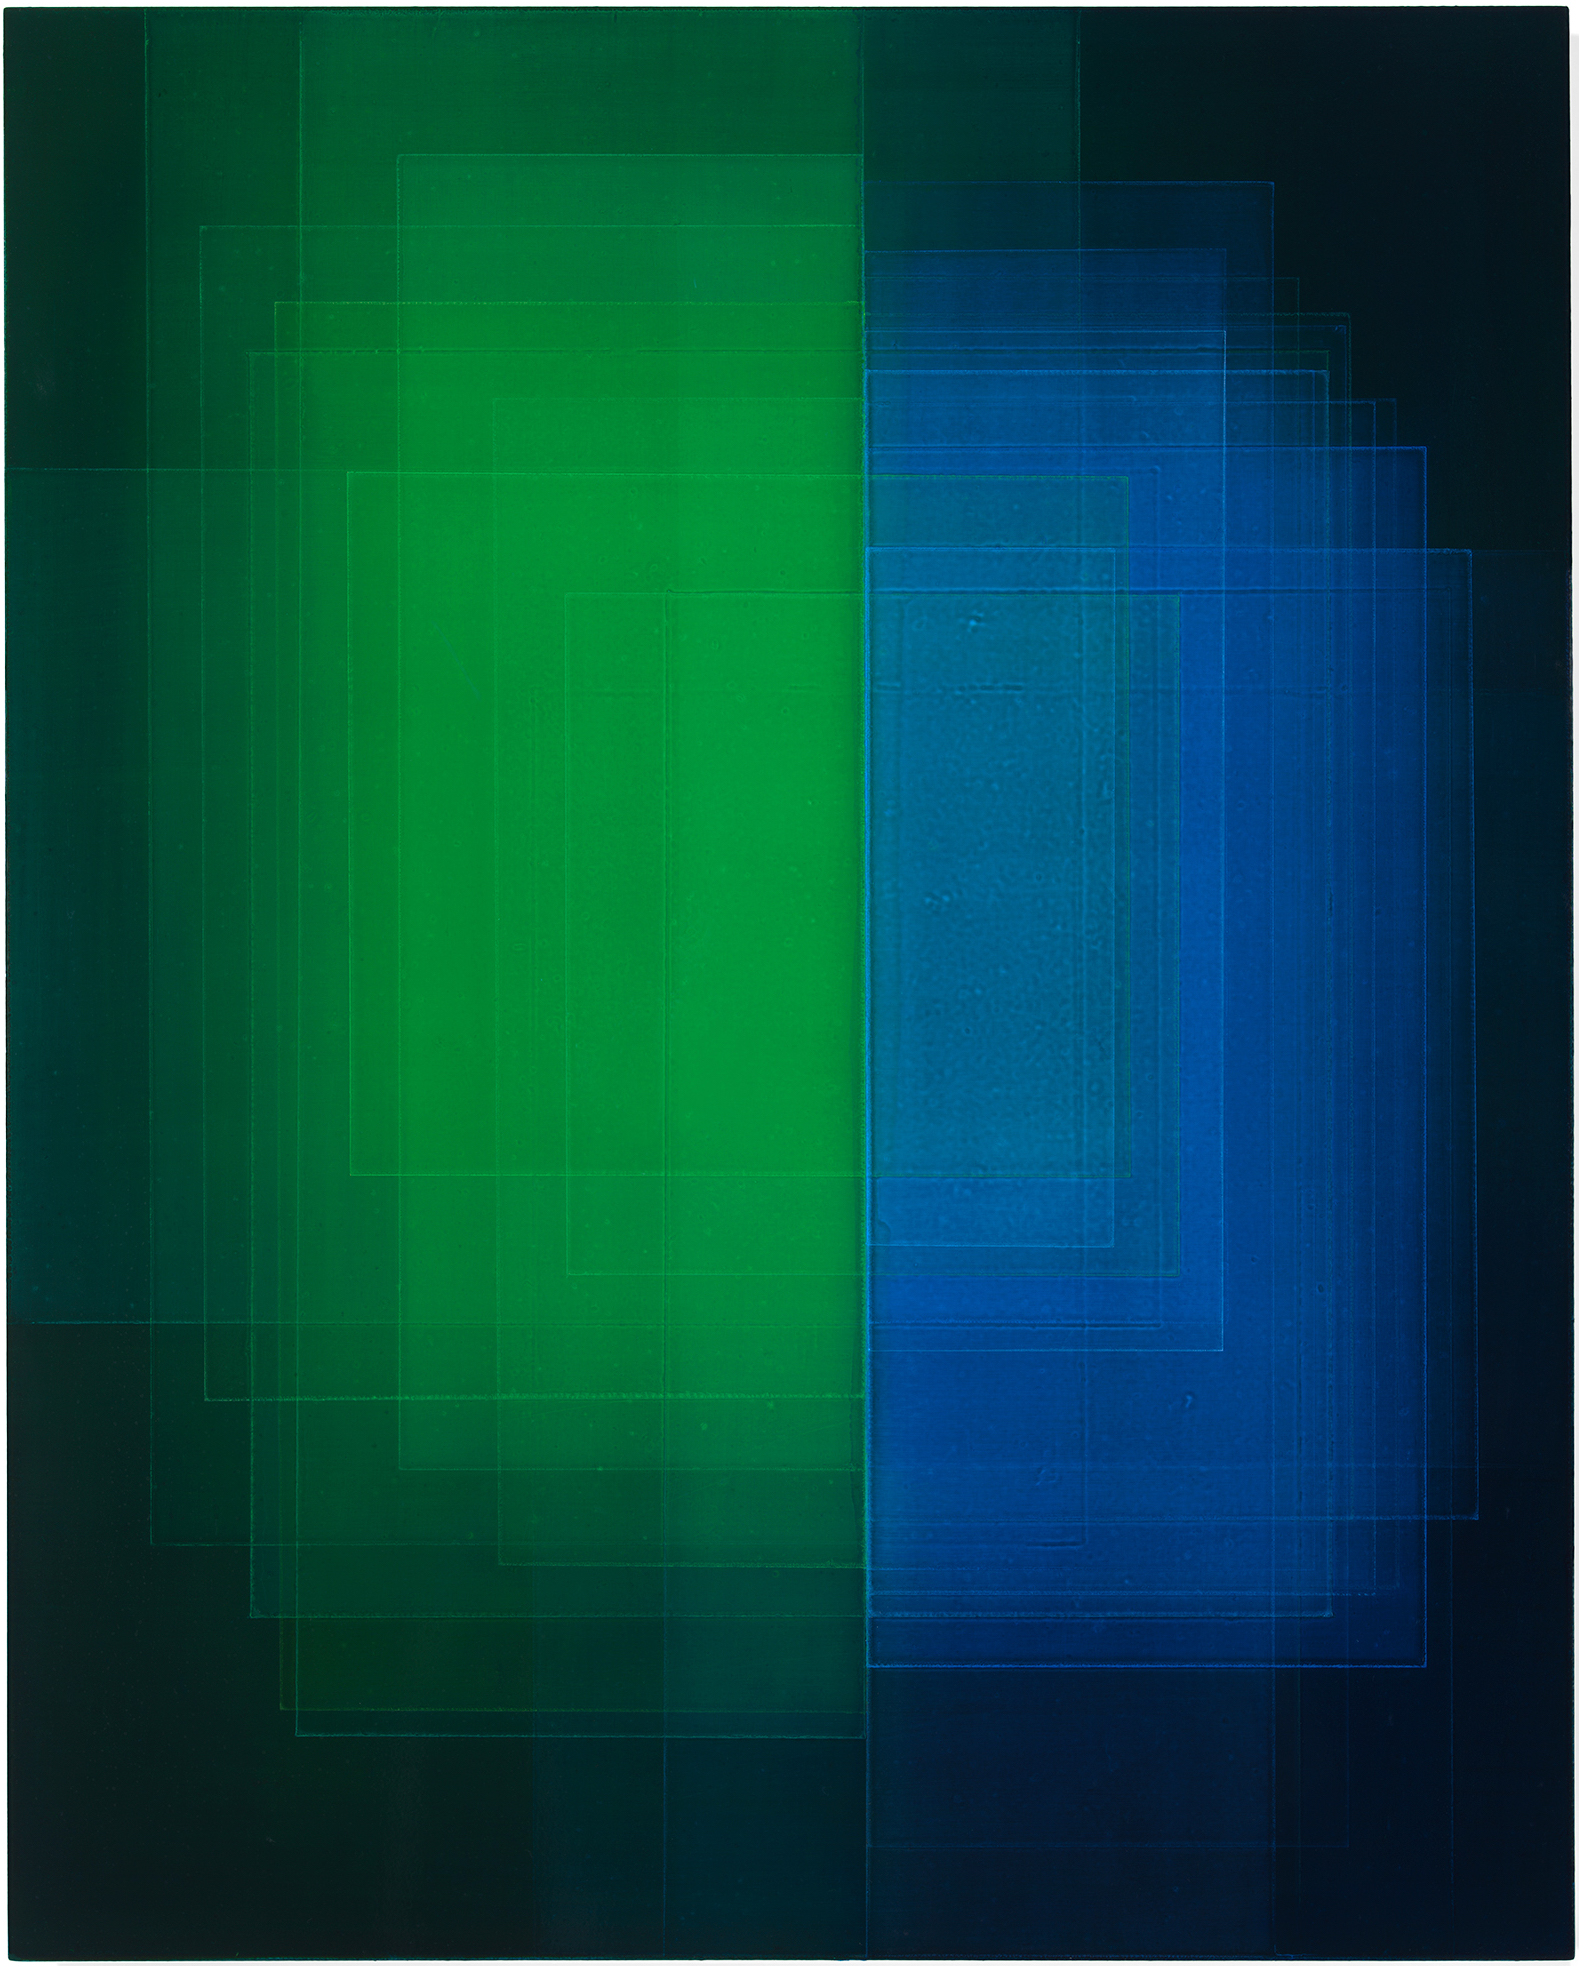 Migrant (Pthalo Blue/Green), 2020 | Oil and acrylic on panel | 20 x 16 inches